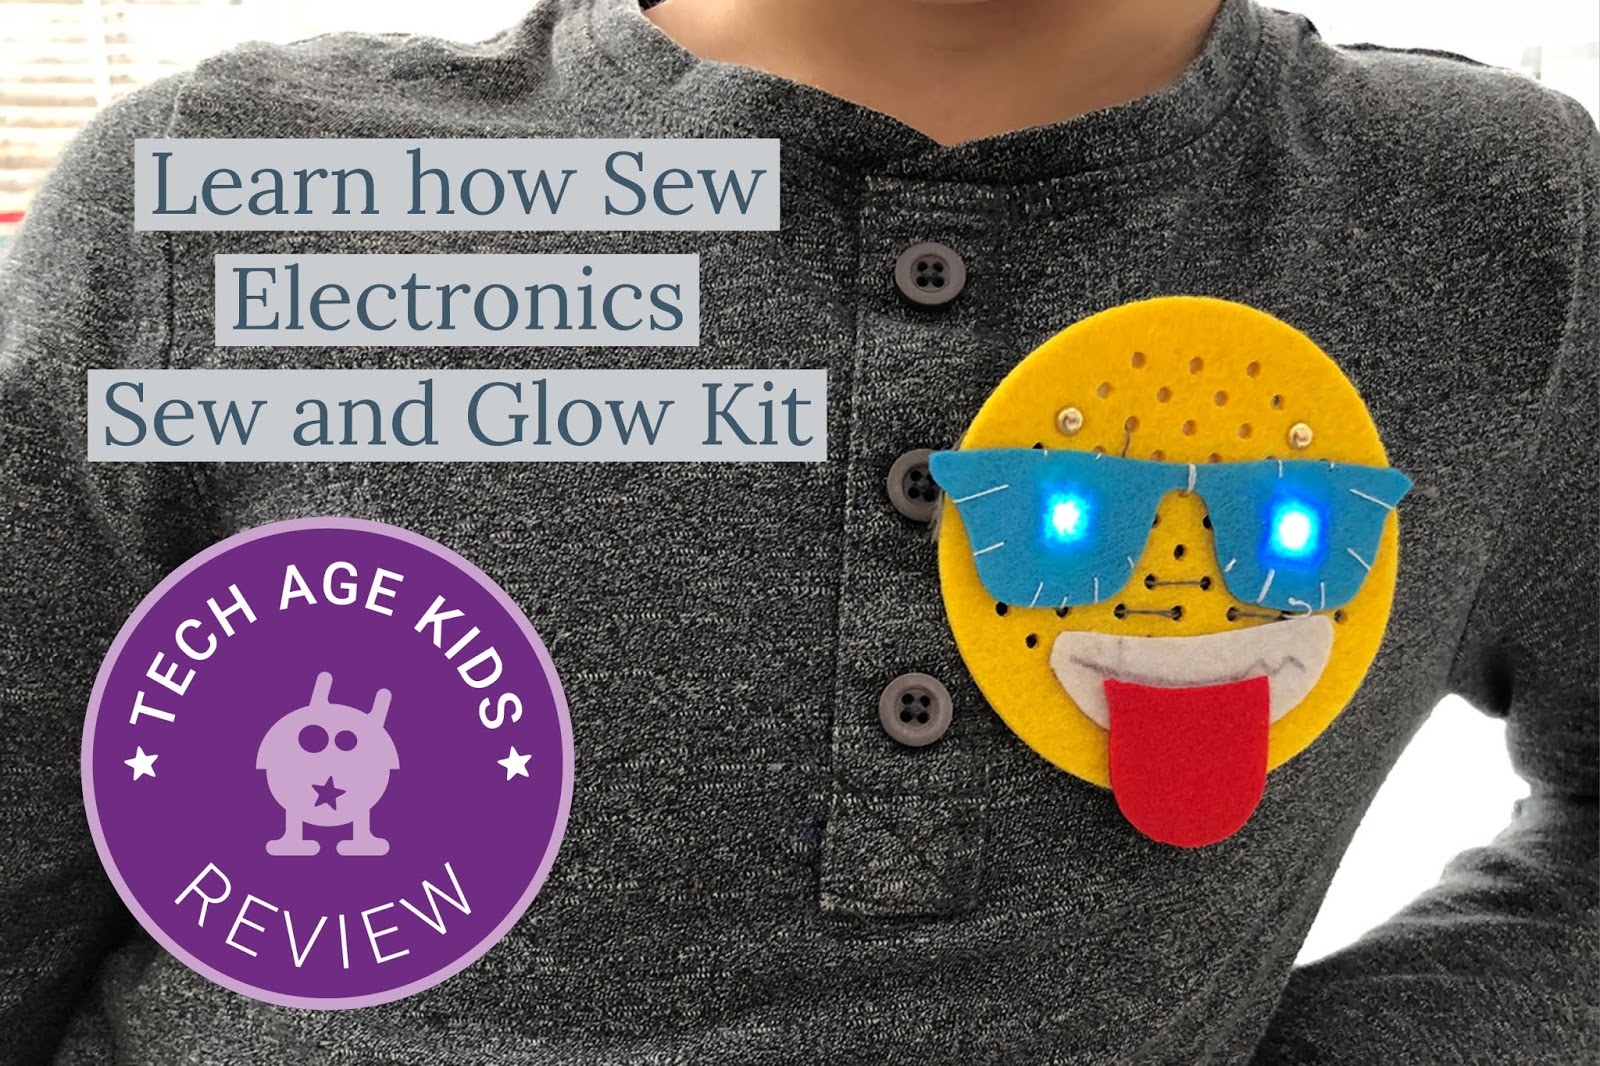 Sew and Glow Kit from Tech Will Save Us - Review, Tech Age Kids